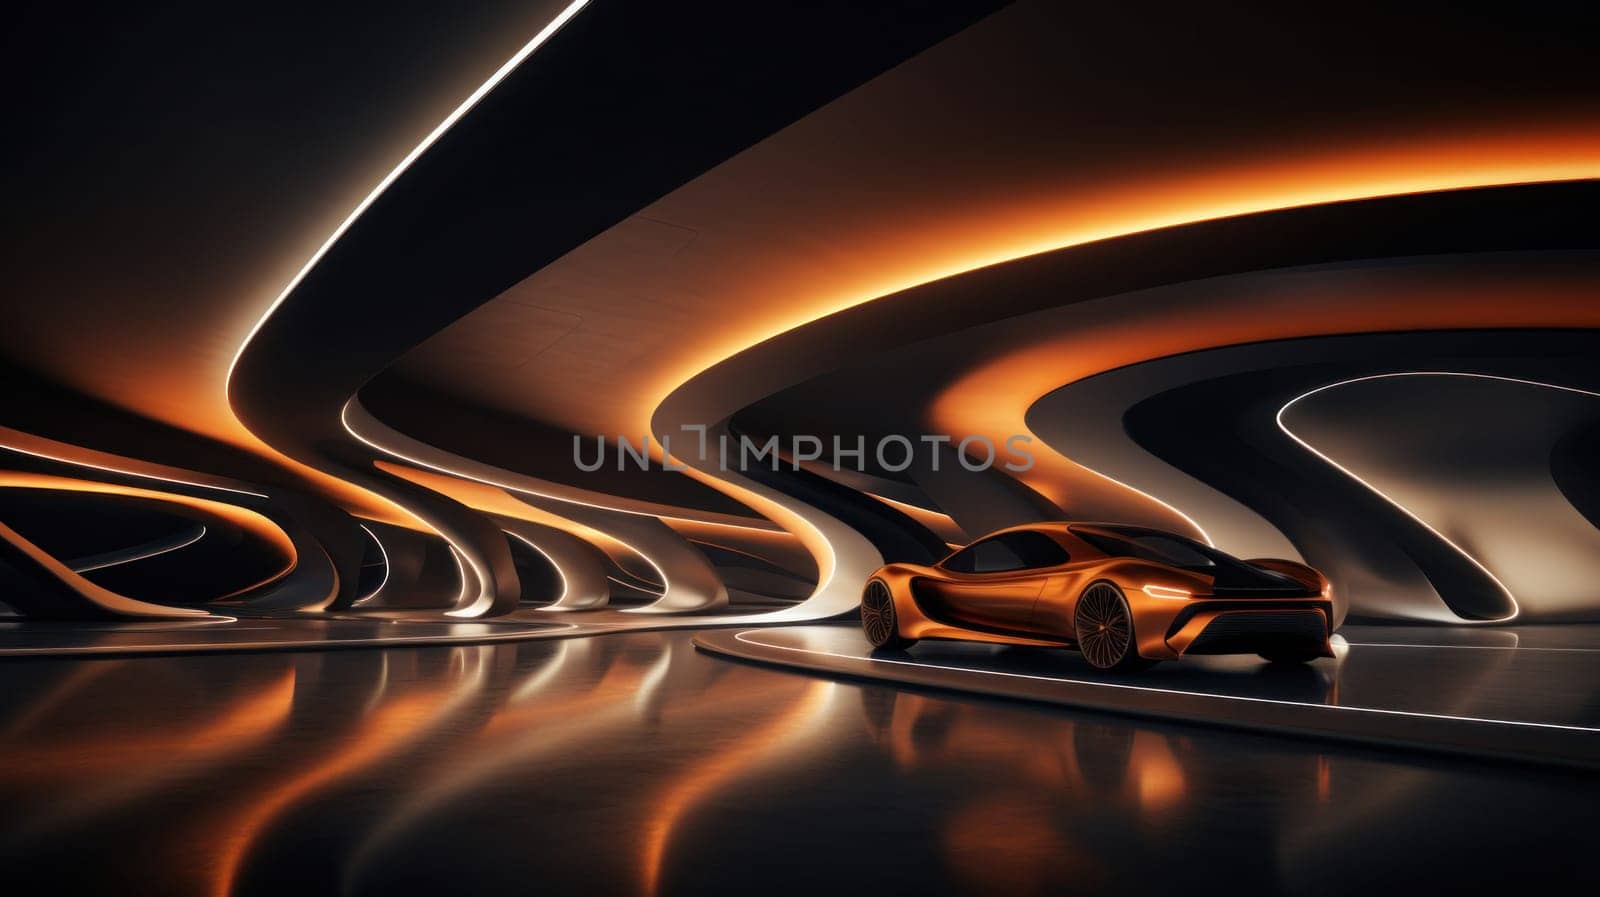 A futuristic car is sitting in a tunnel with orange lighting